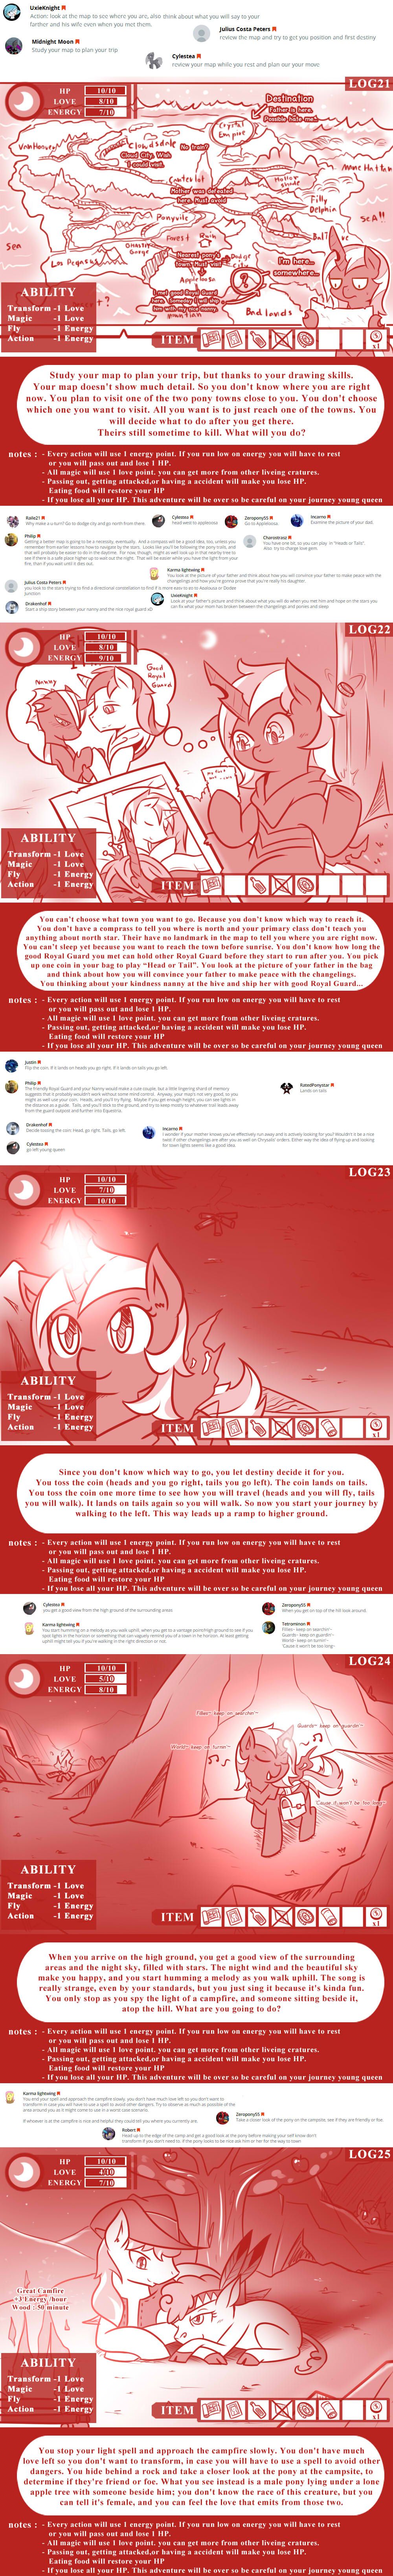 [Vavacung] The Adventure Logs Of Young Queen (My Little Pony Friendship is Magic) [Updated] [Ongoing] 7